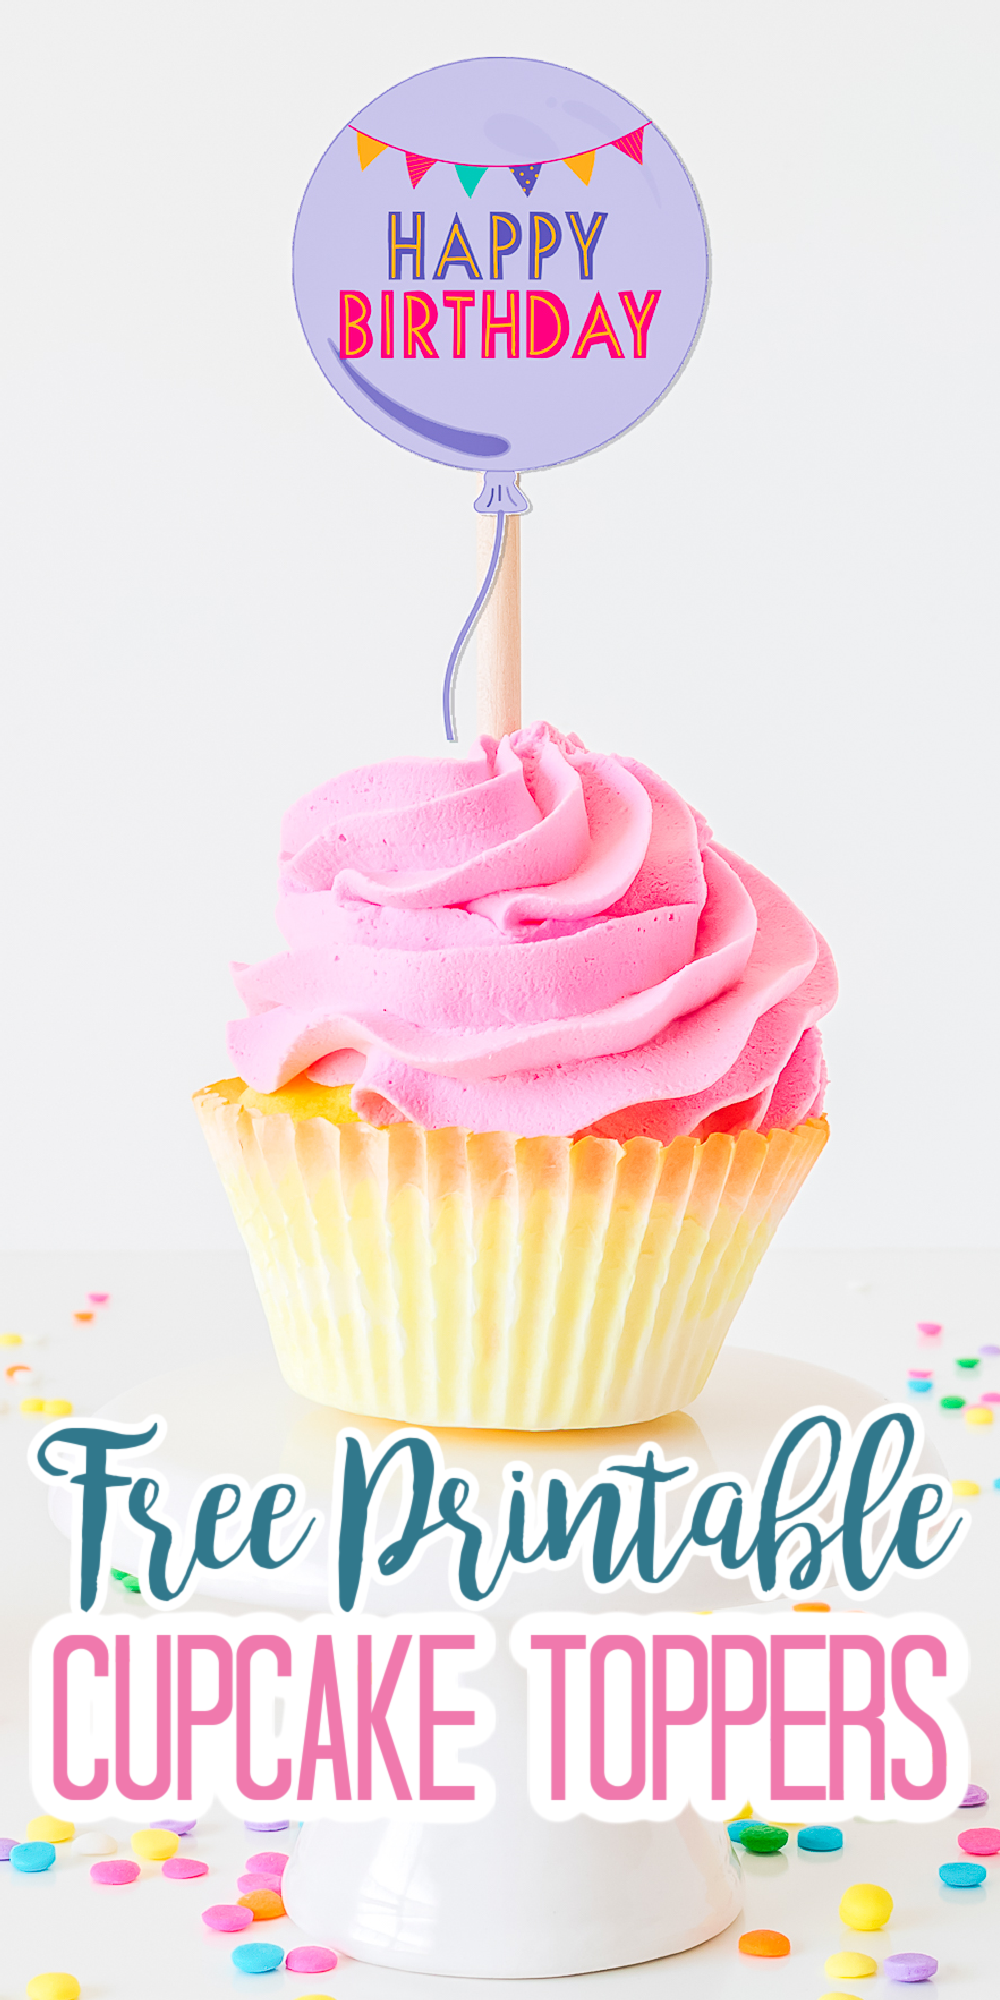 Download Free Printable Cupcake Toppers And More Party Printables The Country Chic Cottage